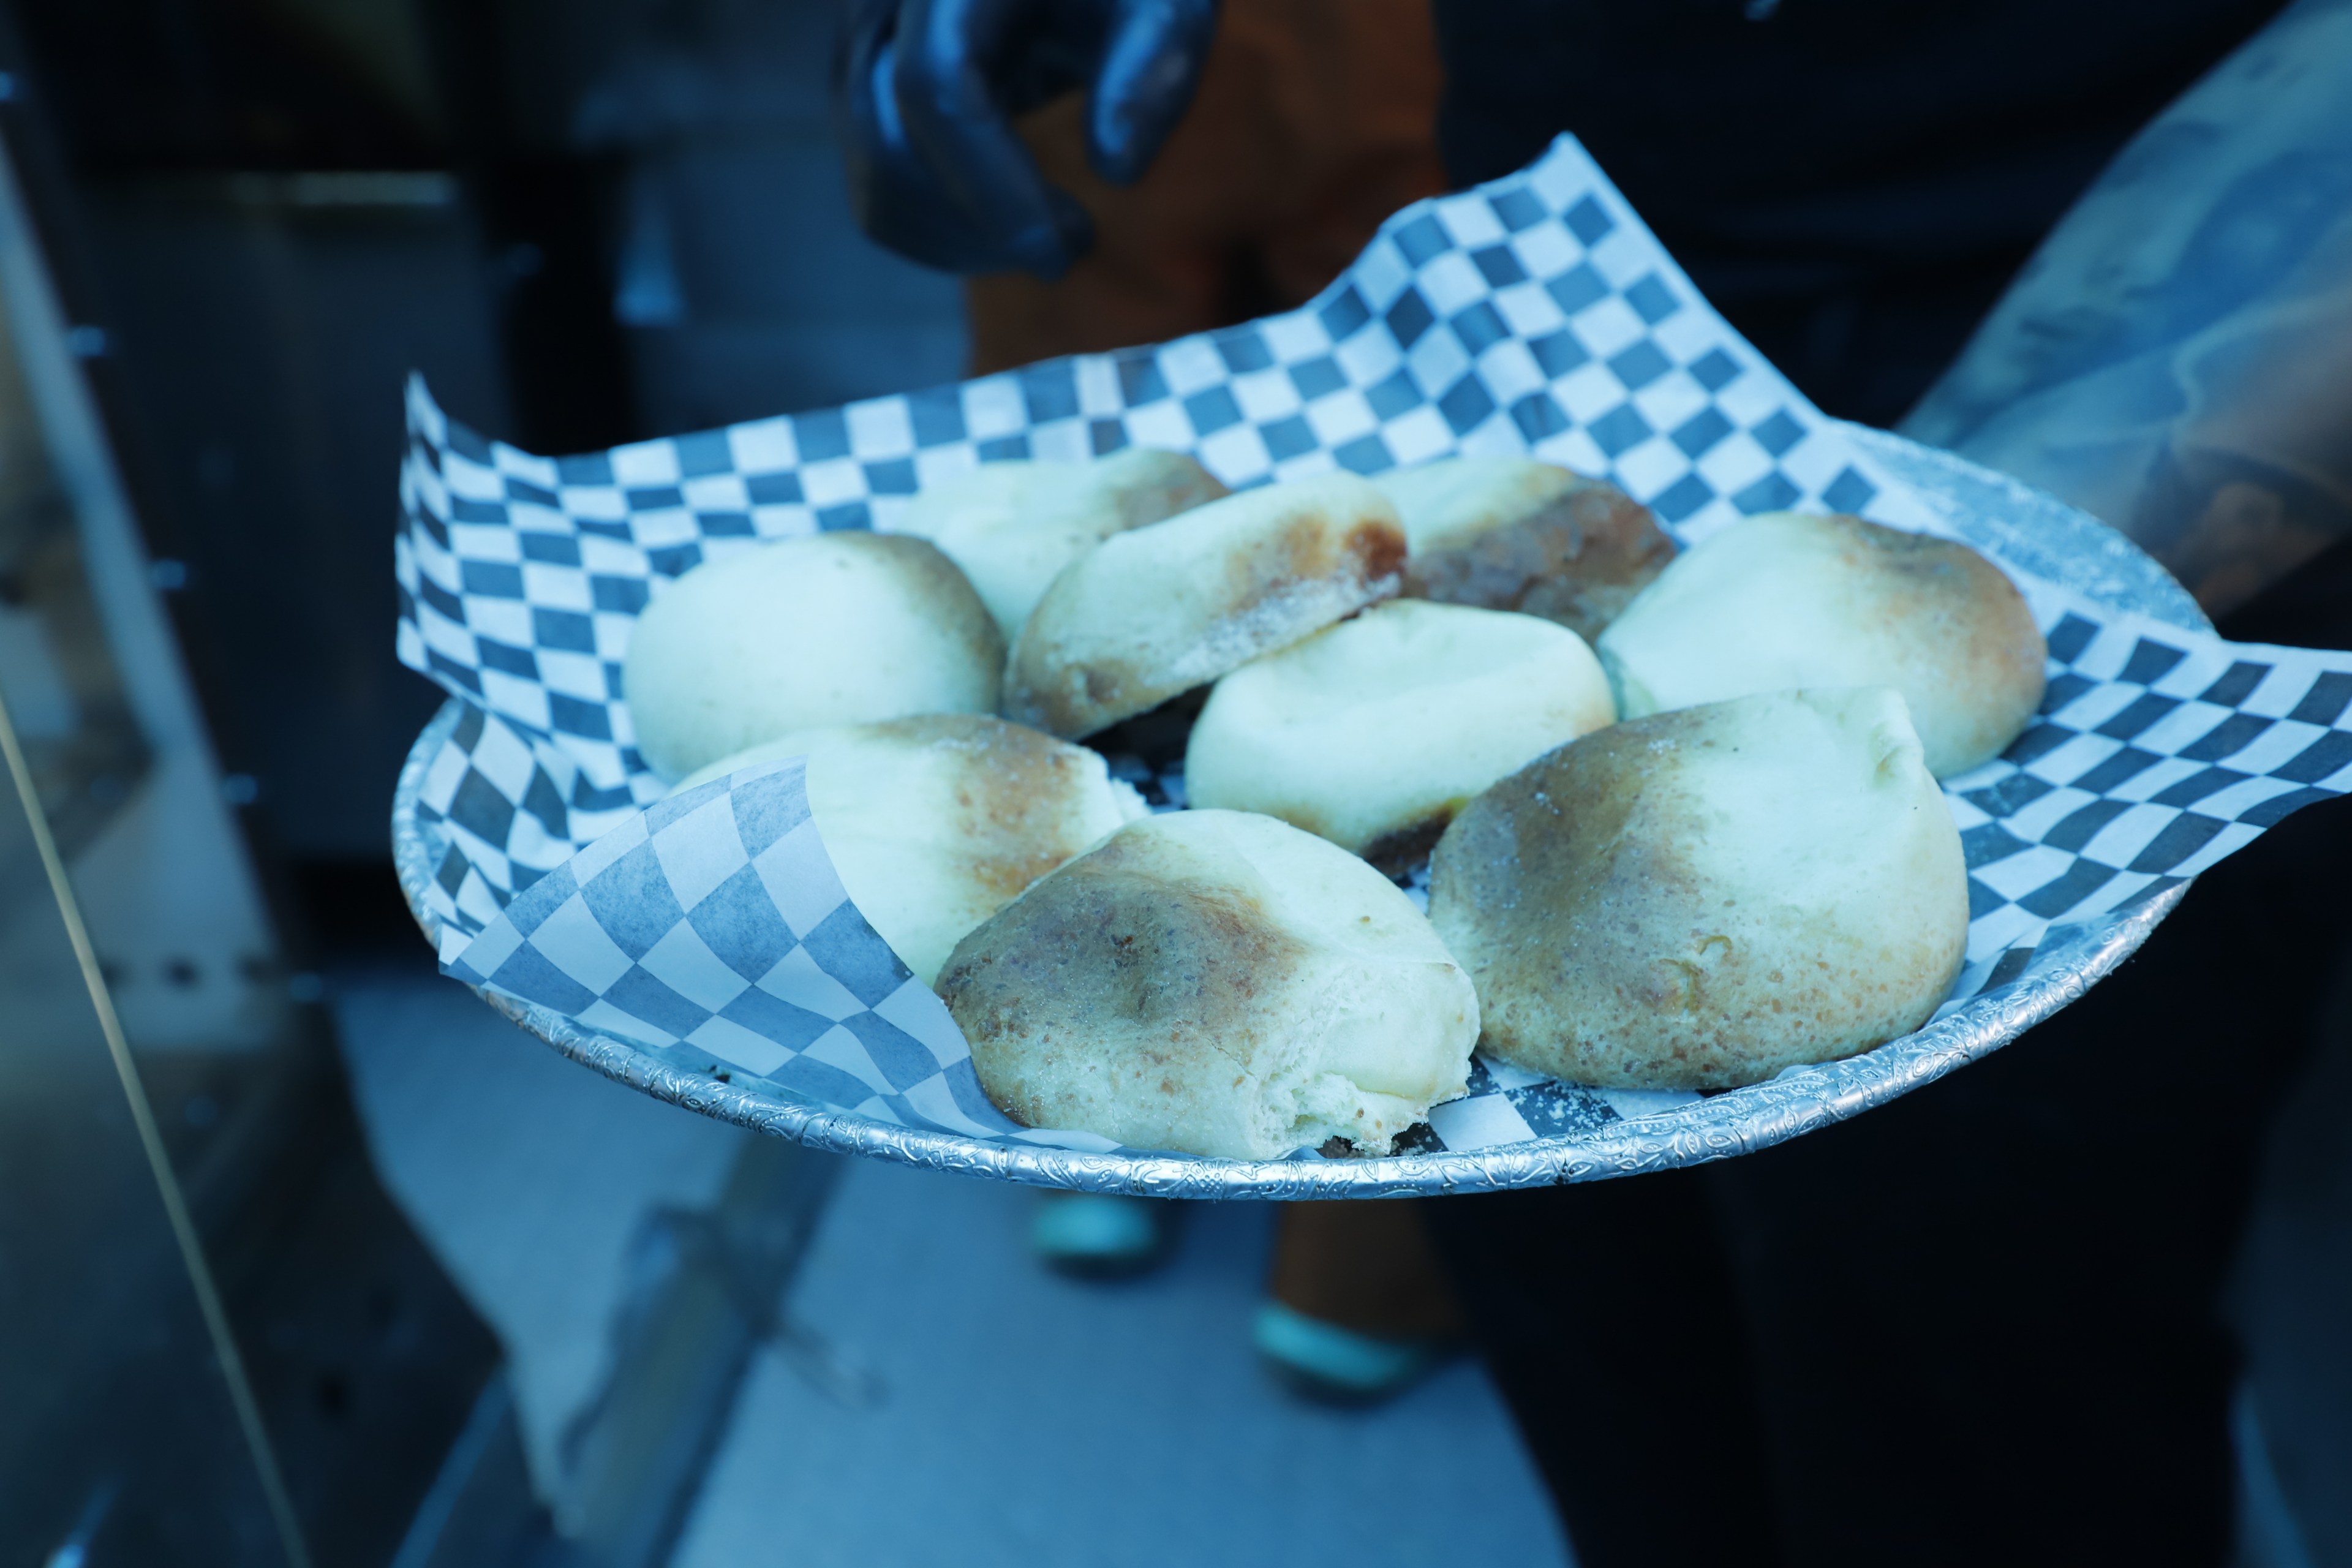 A platter of round, baked rolls on a checkered paper, held by someone in black gloves.